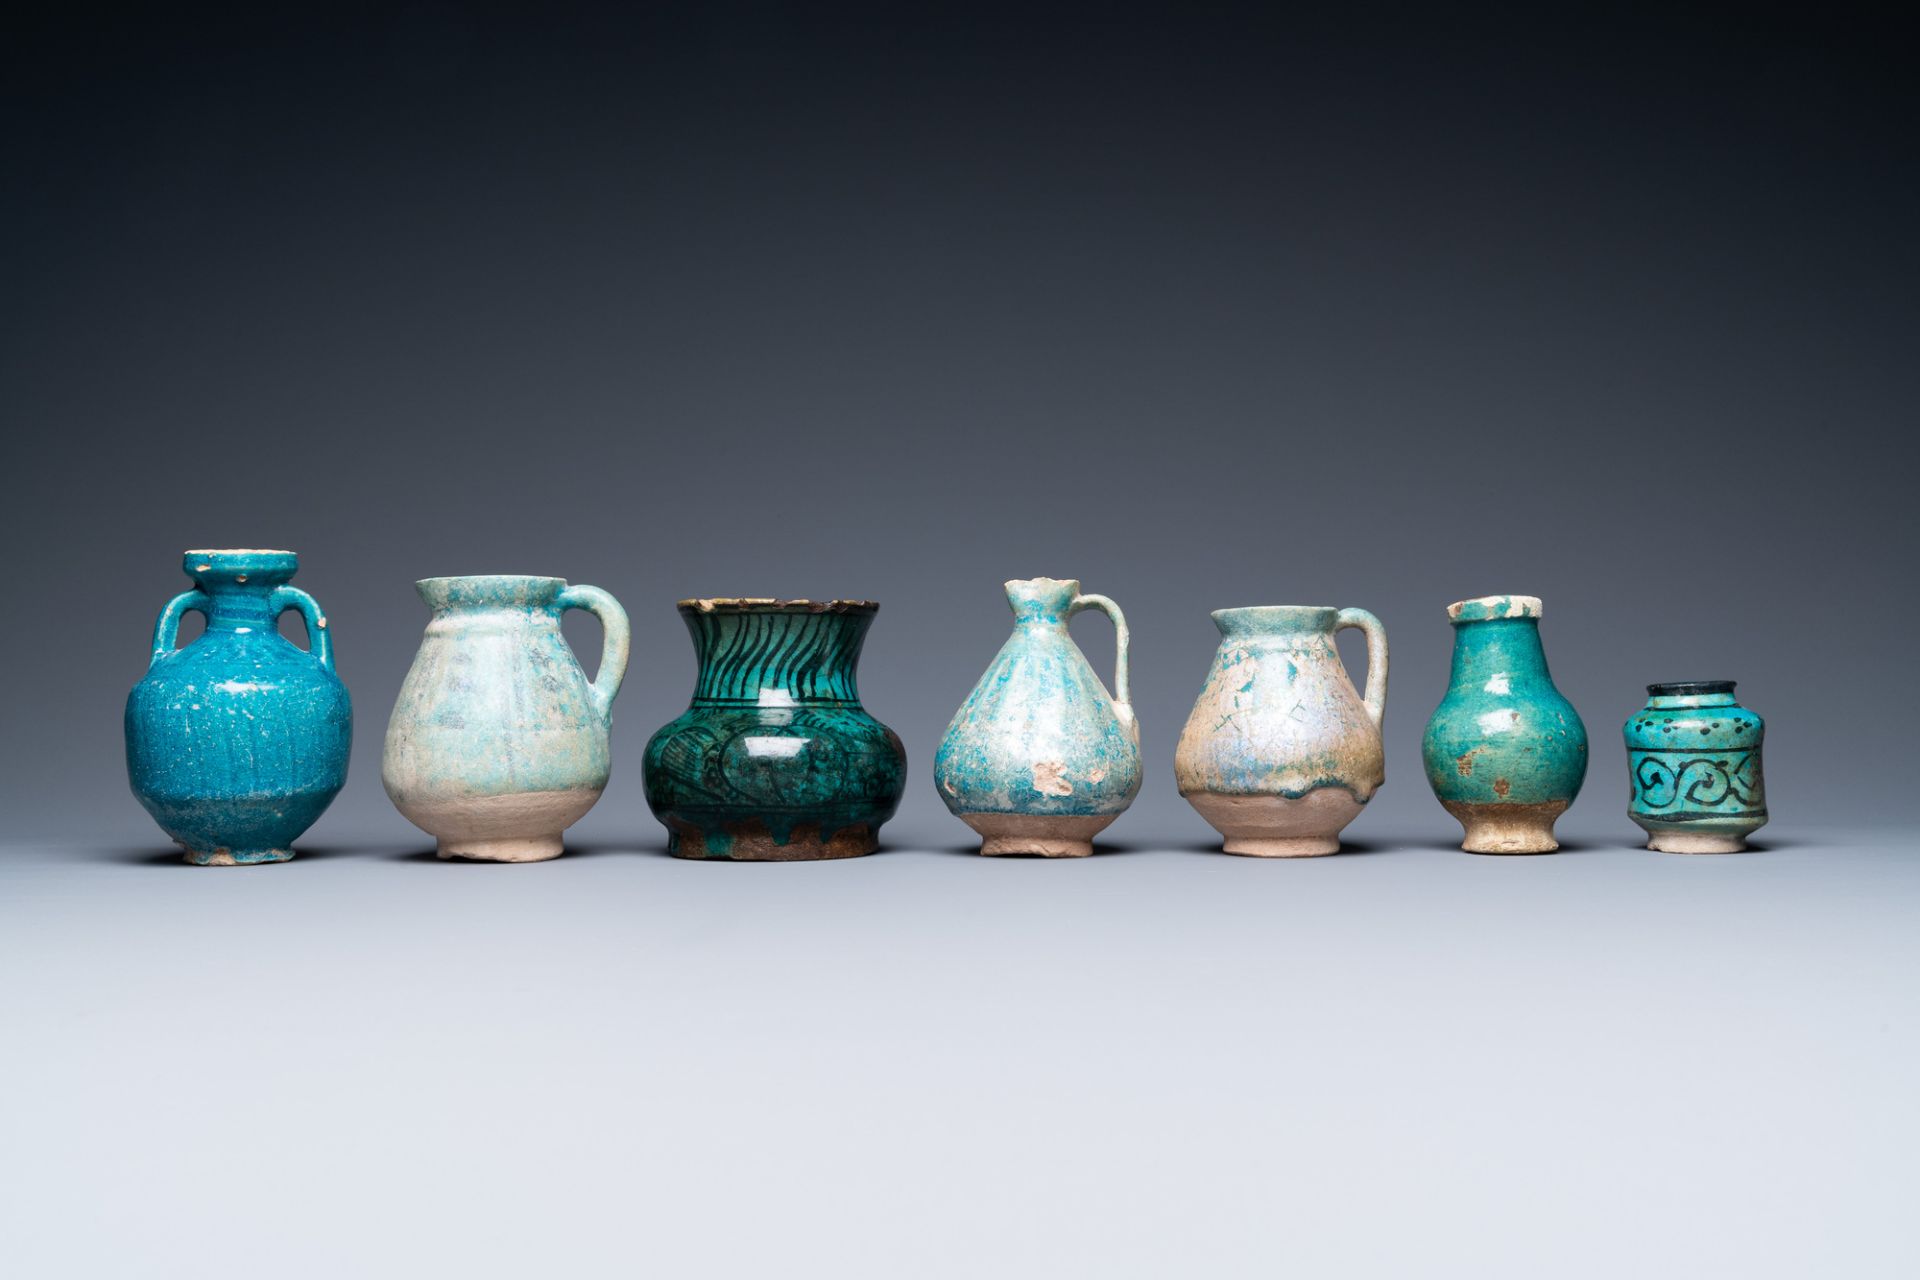 A collection of seven turquoise-glazed jugs and vases, Middle-East, 13th C. and later - Image 2 of 7